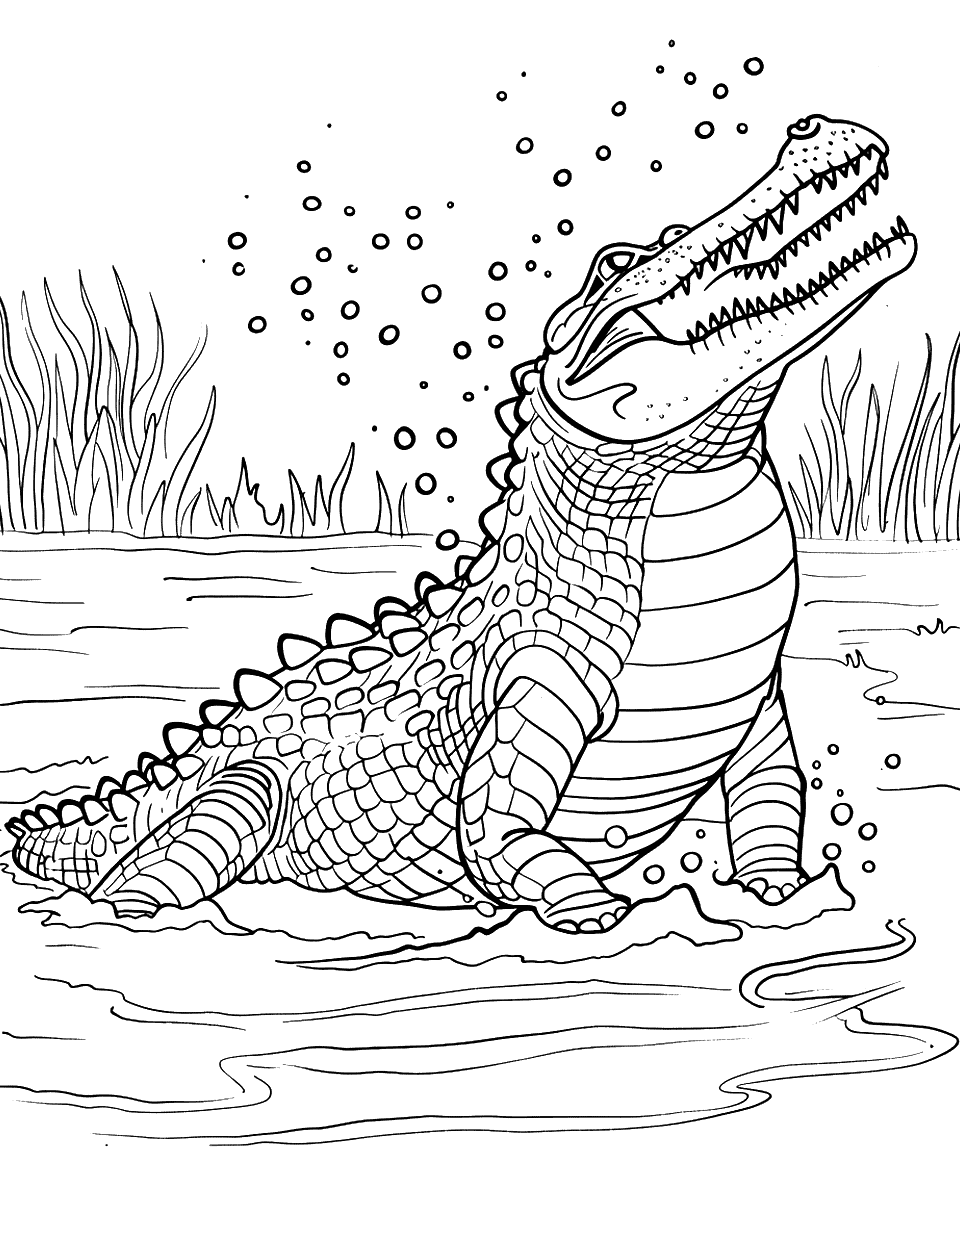 Summer Crocodile Fun Coloring Page - A crocodile playfully splashing water in a shallow pond.